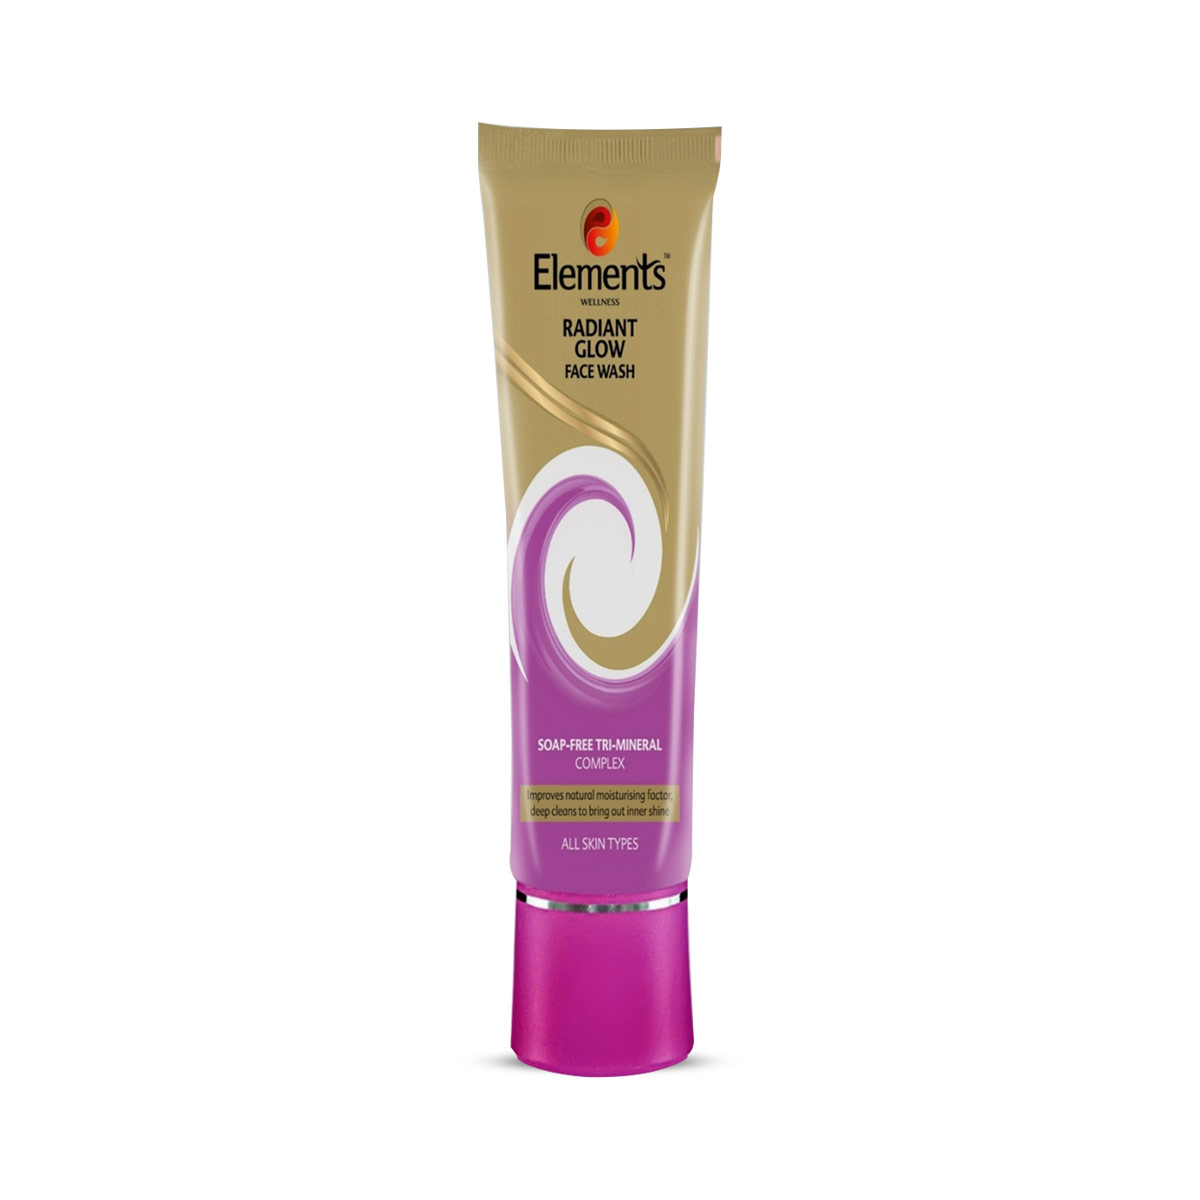 Buy Elements Radiant Glow Face Wash at Best Price Online